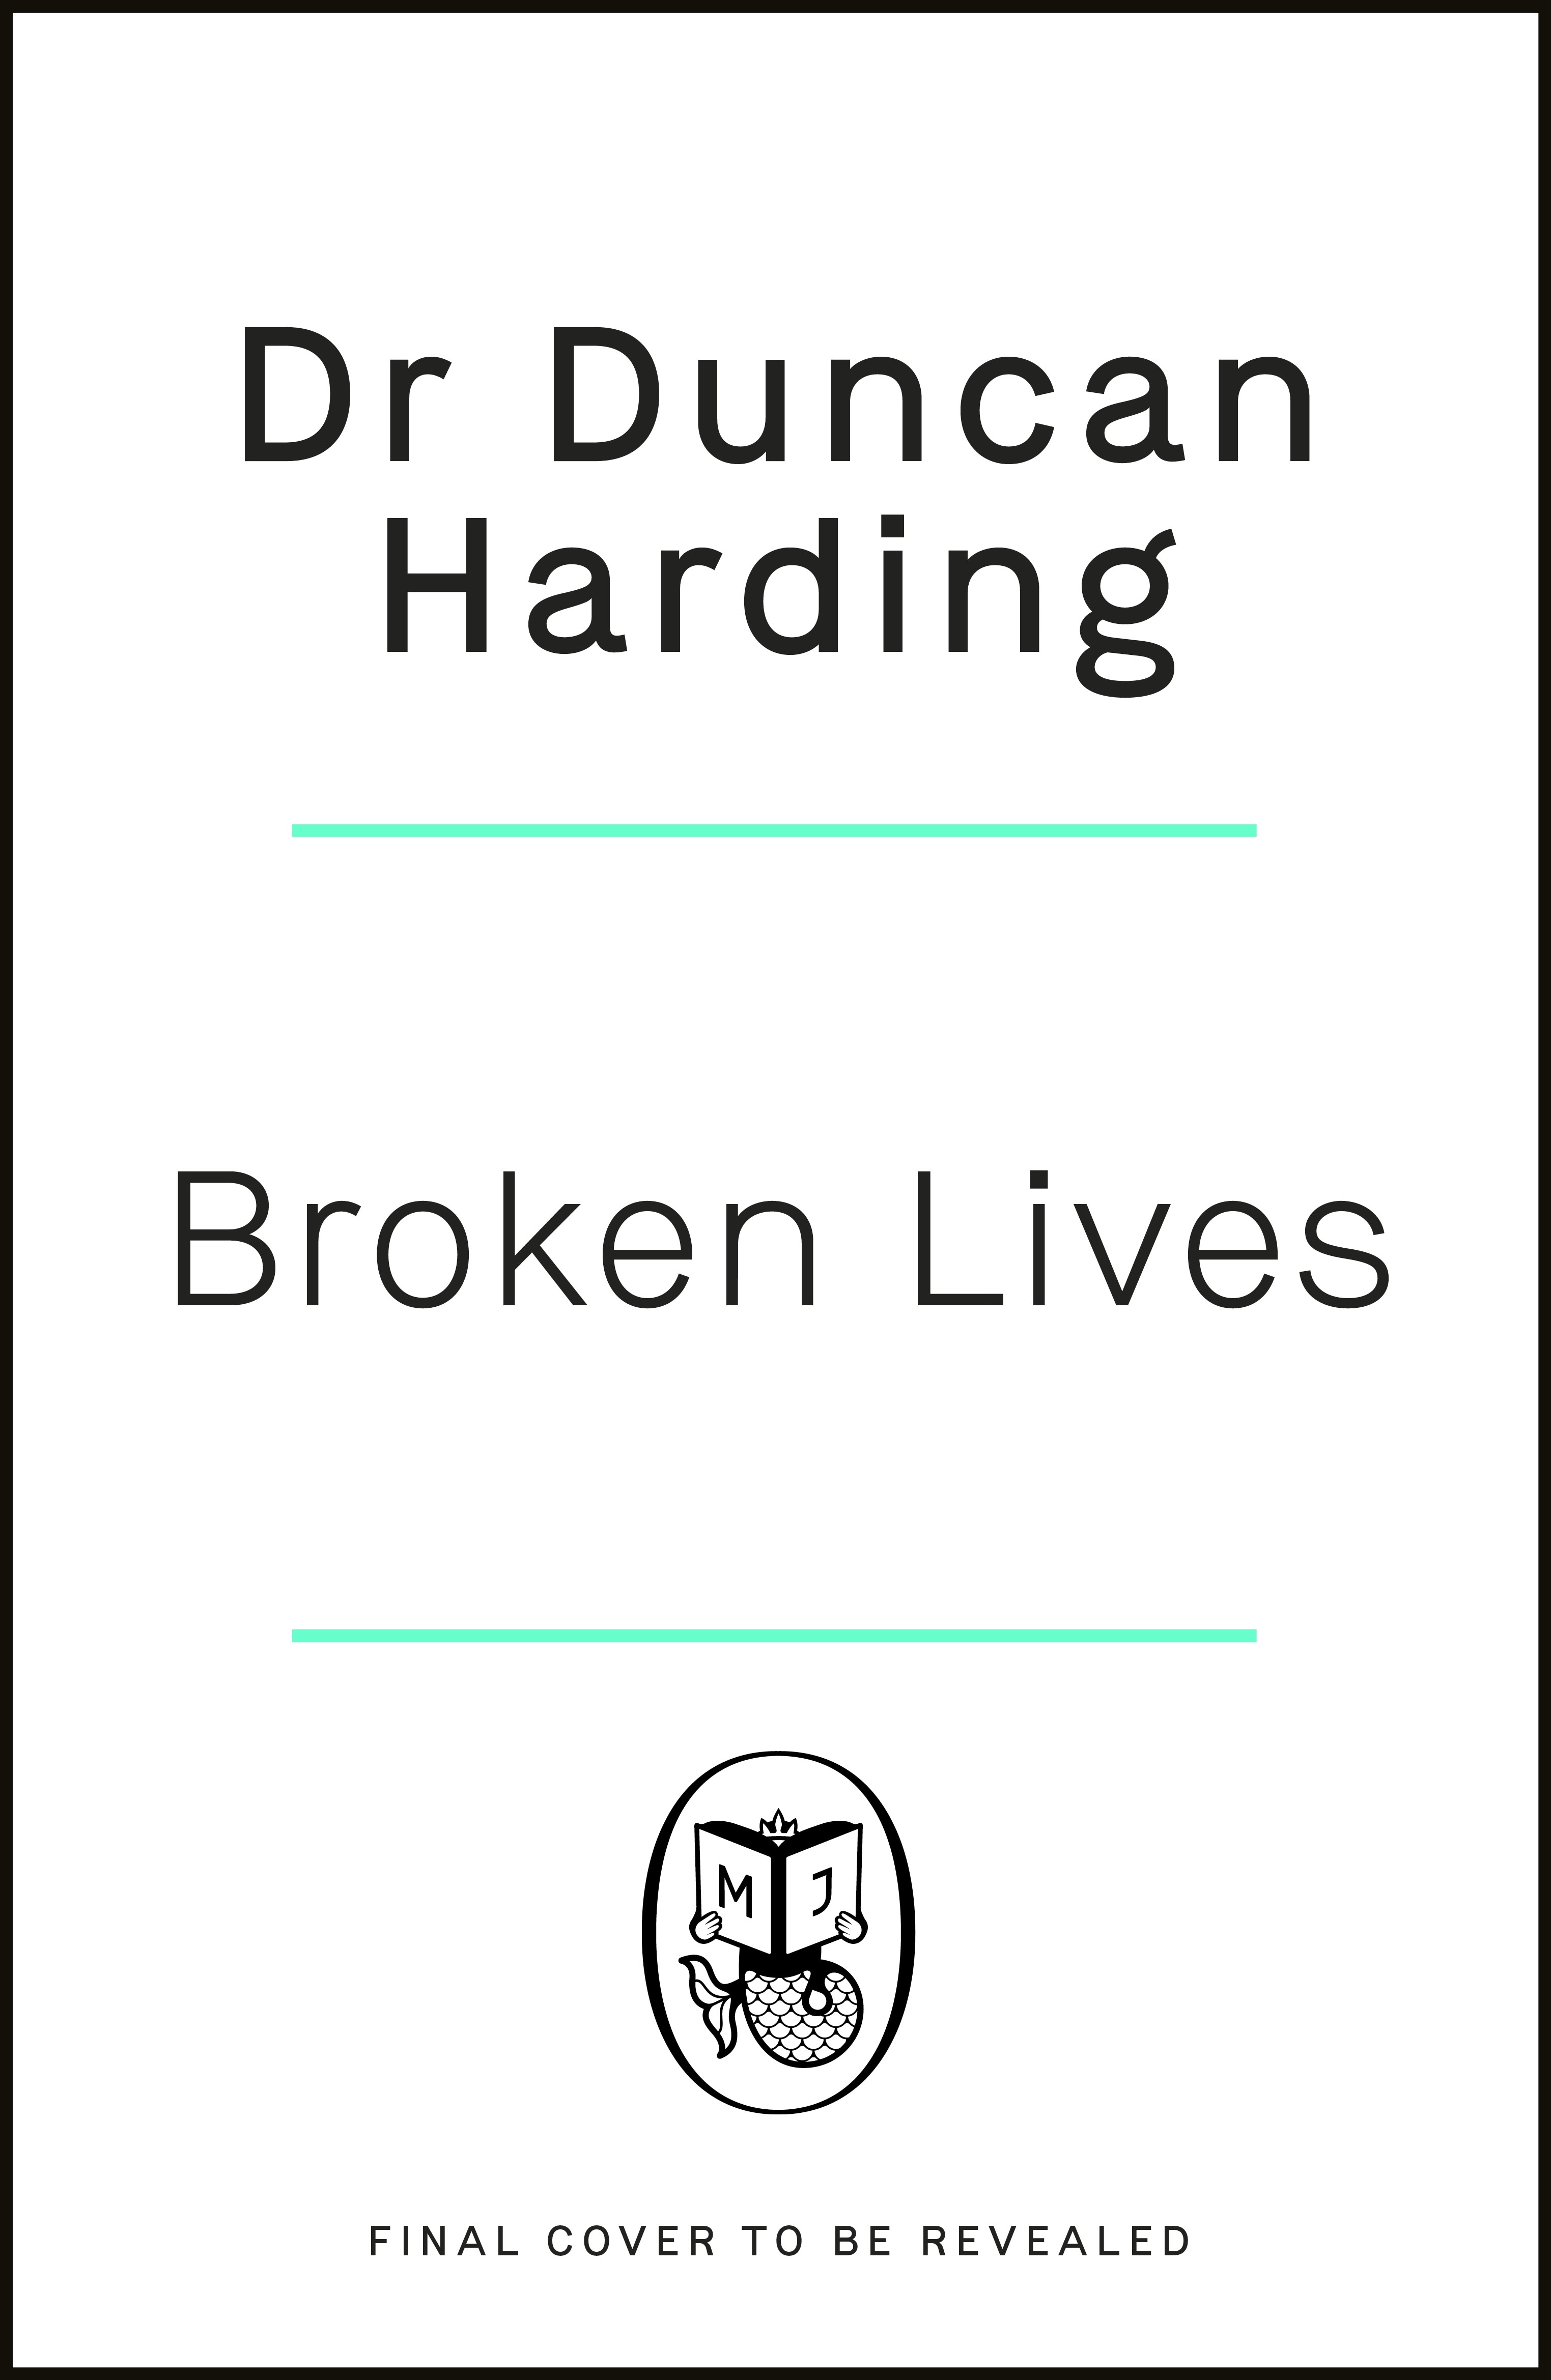 Book “Untitled” by Duncan Harding — February 2, 2023